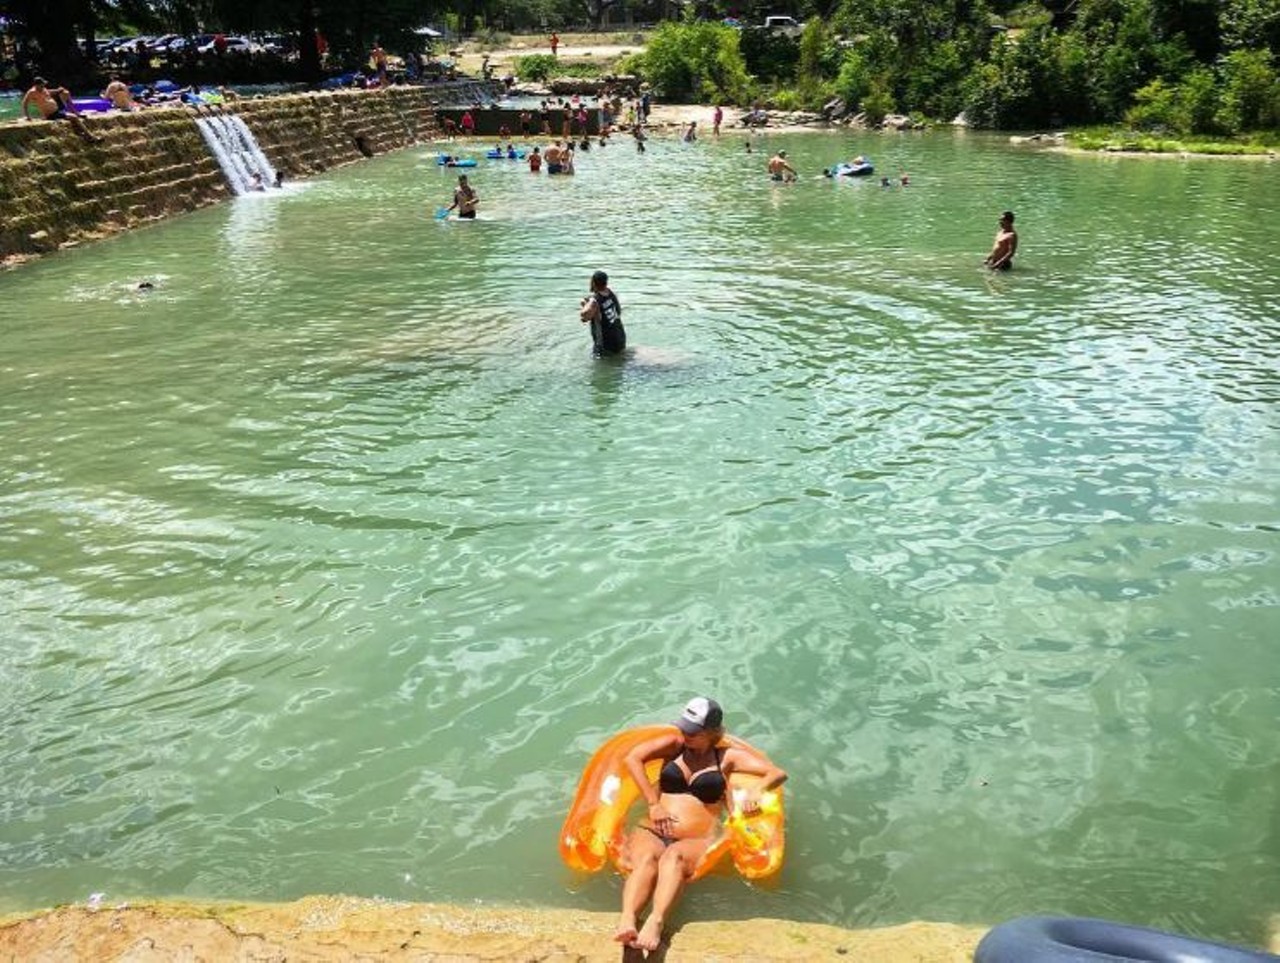 Blanco State Park
101 Park Rd. 23, Blanco, (830) 833-4333
This Texas swim spot is located only about an hour away from downtown San Antonio, and with an entrance fee of only $5 per person, it&#146;s easy to see why it&#146;s so popular.
Photo via Instagram, _jeepingtx_